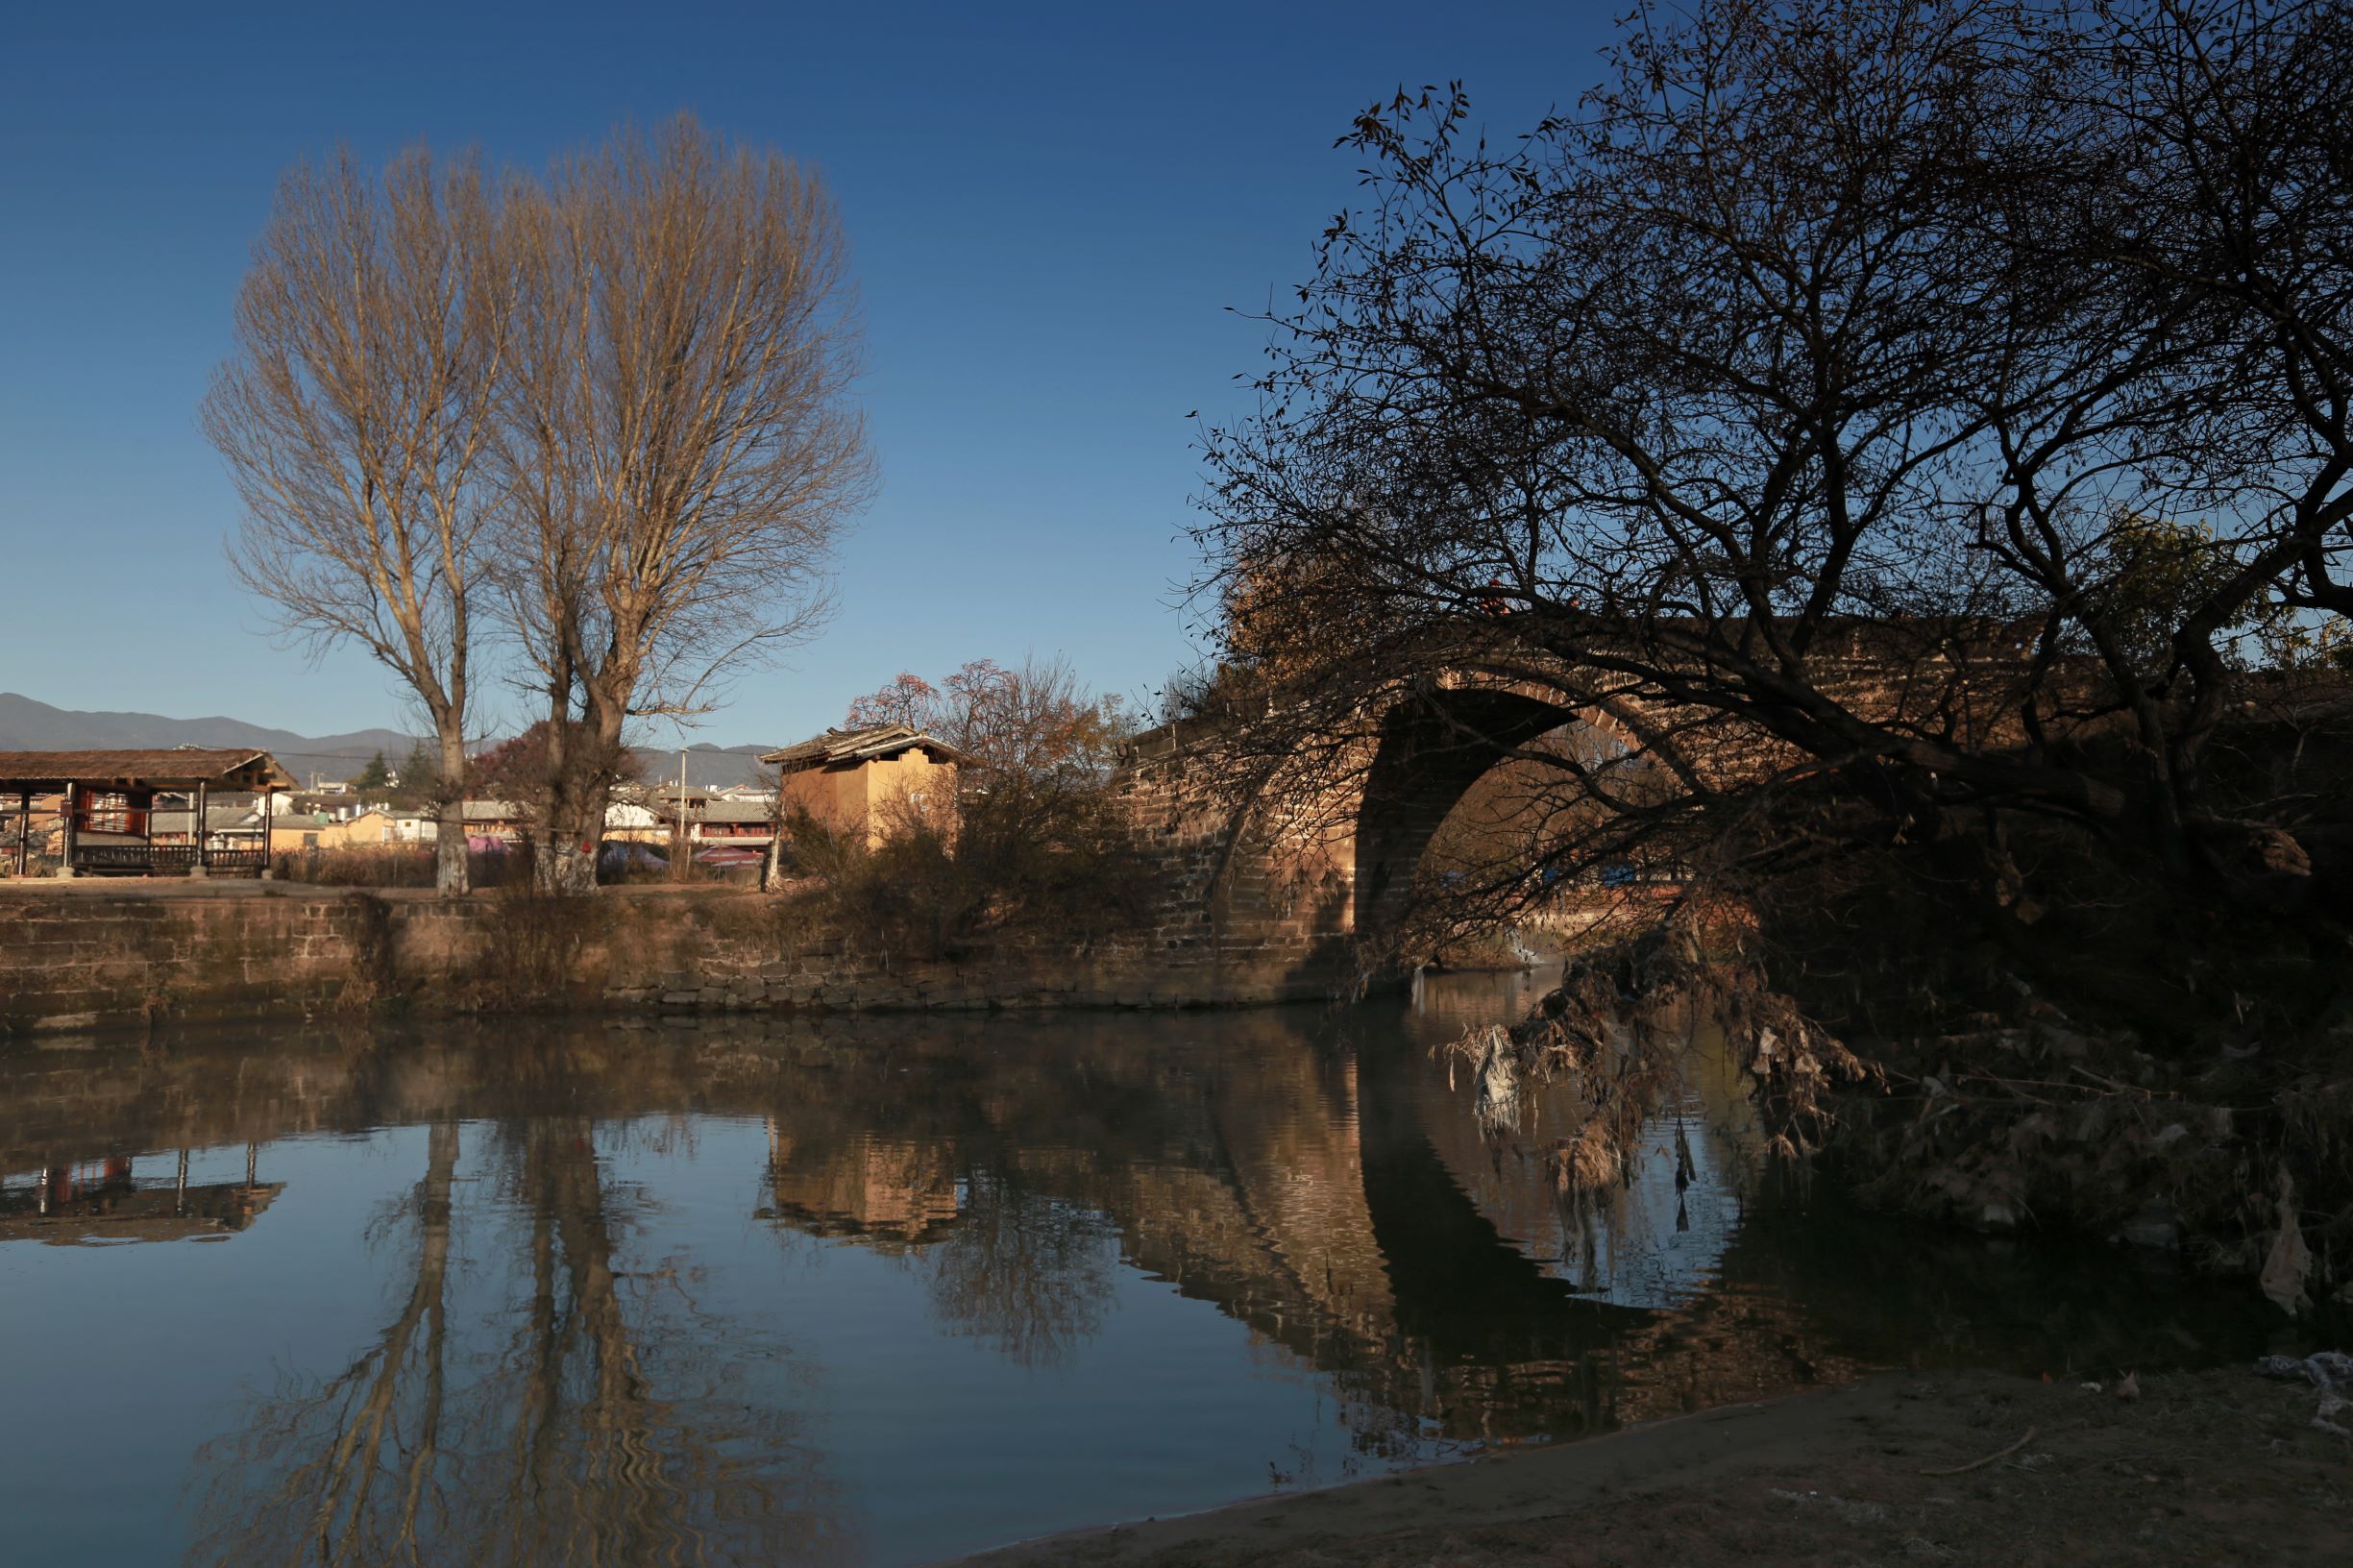 Shaxi, a romantic old town on the Tea-Horse Road